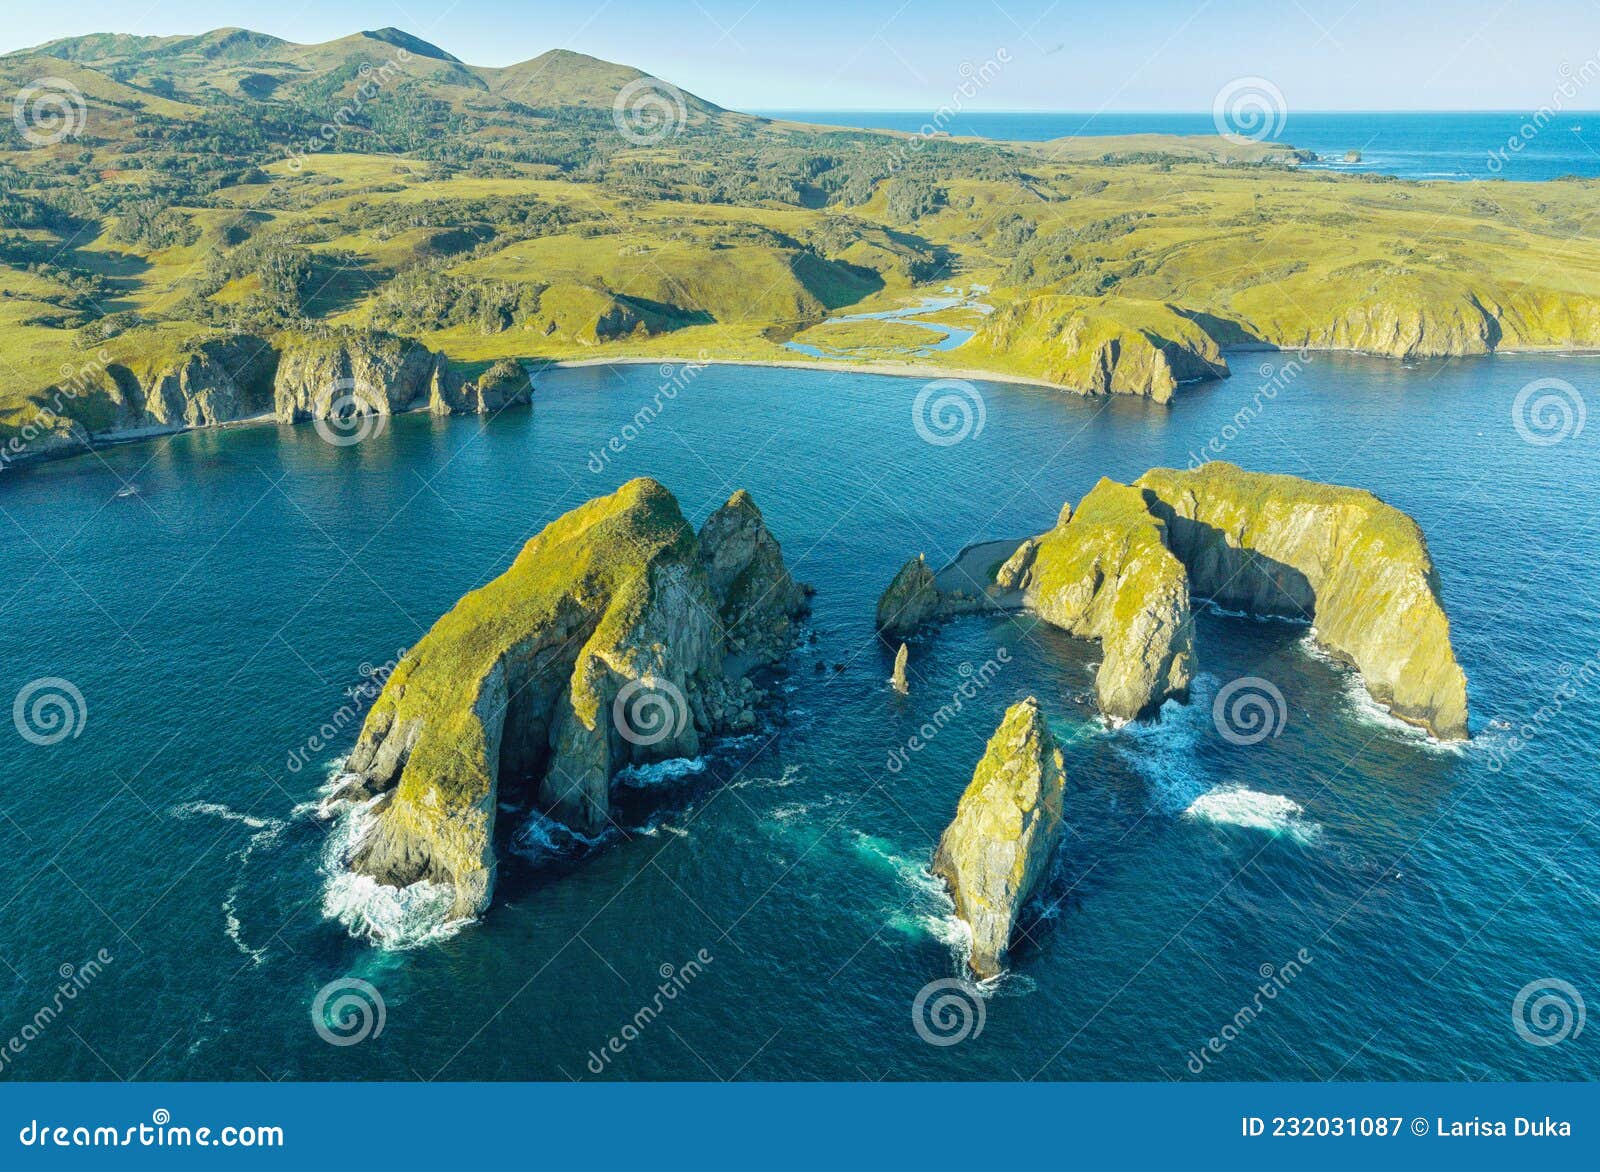 drone point of view of an unnamed bay on island of shikotan, kuril islands